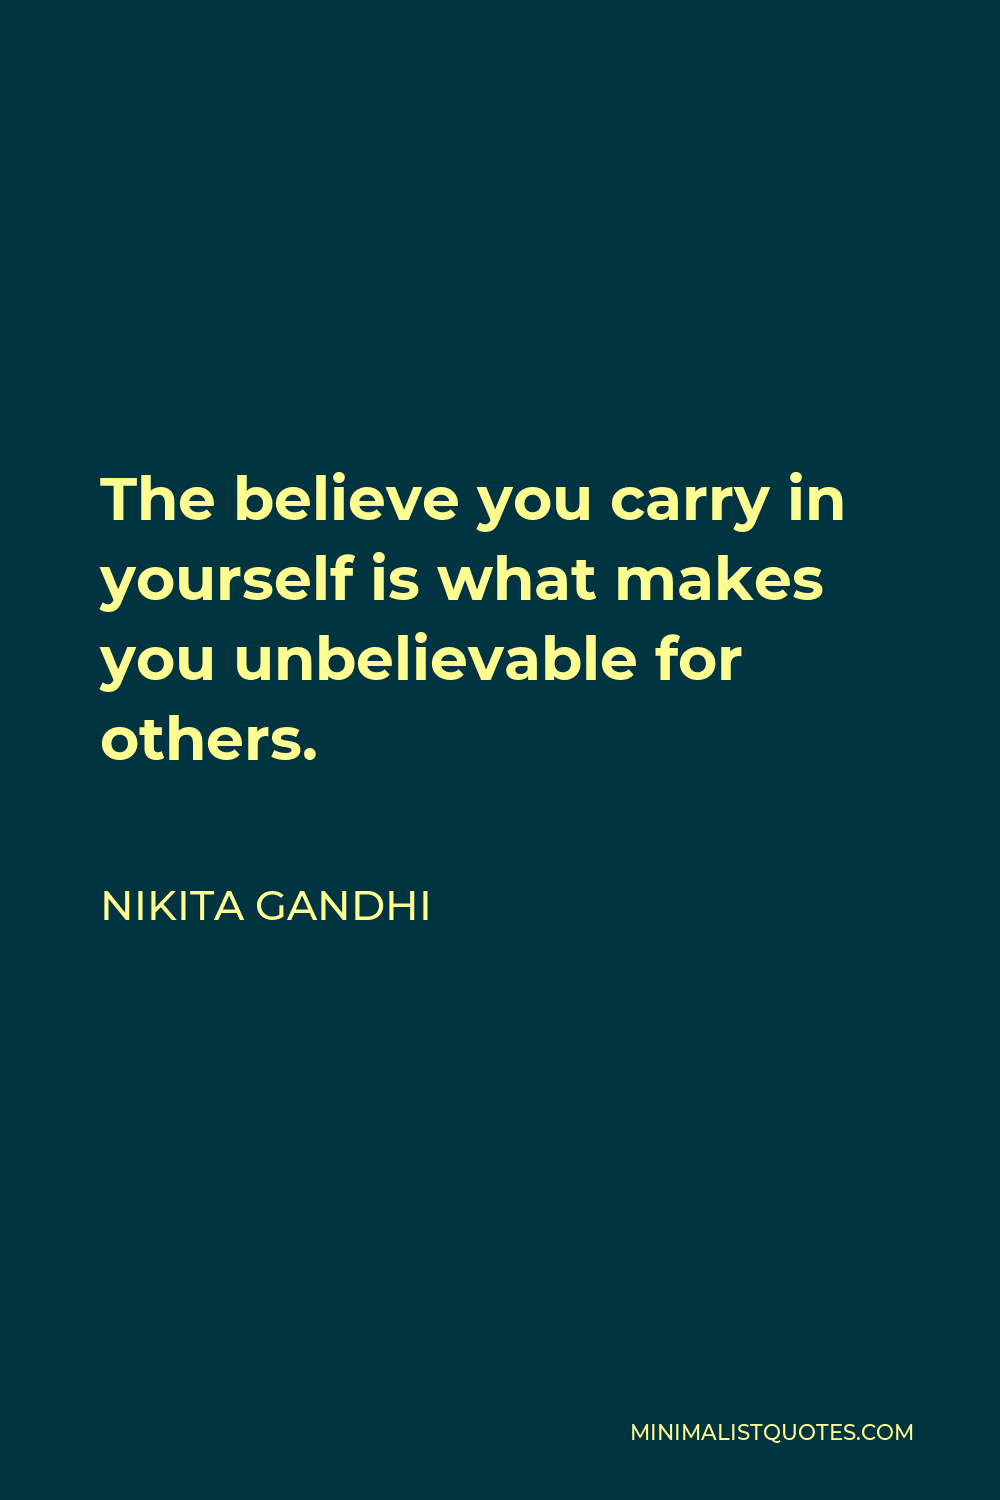 Nikita Gandhi Quote - The believe you carry in yourself is what makes you unbelievable for others.